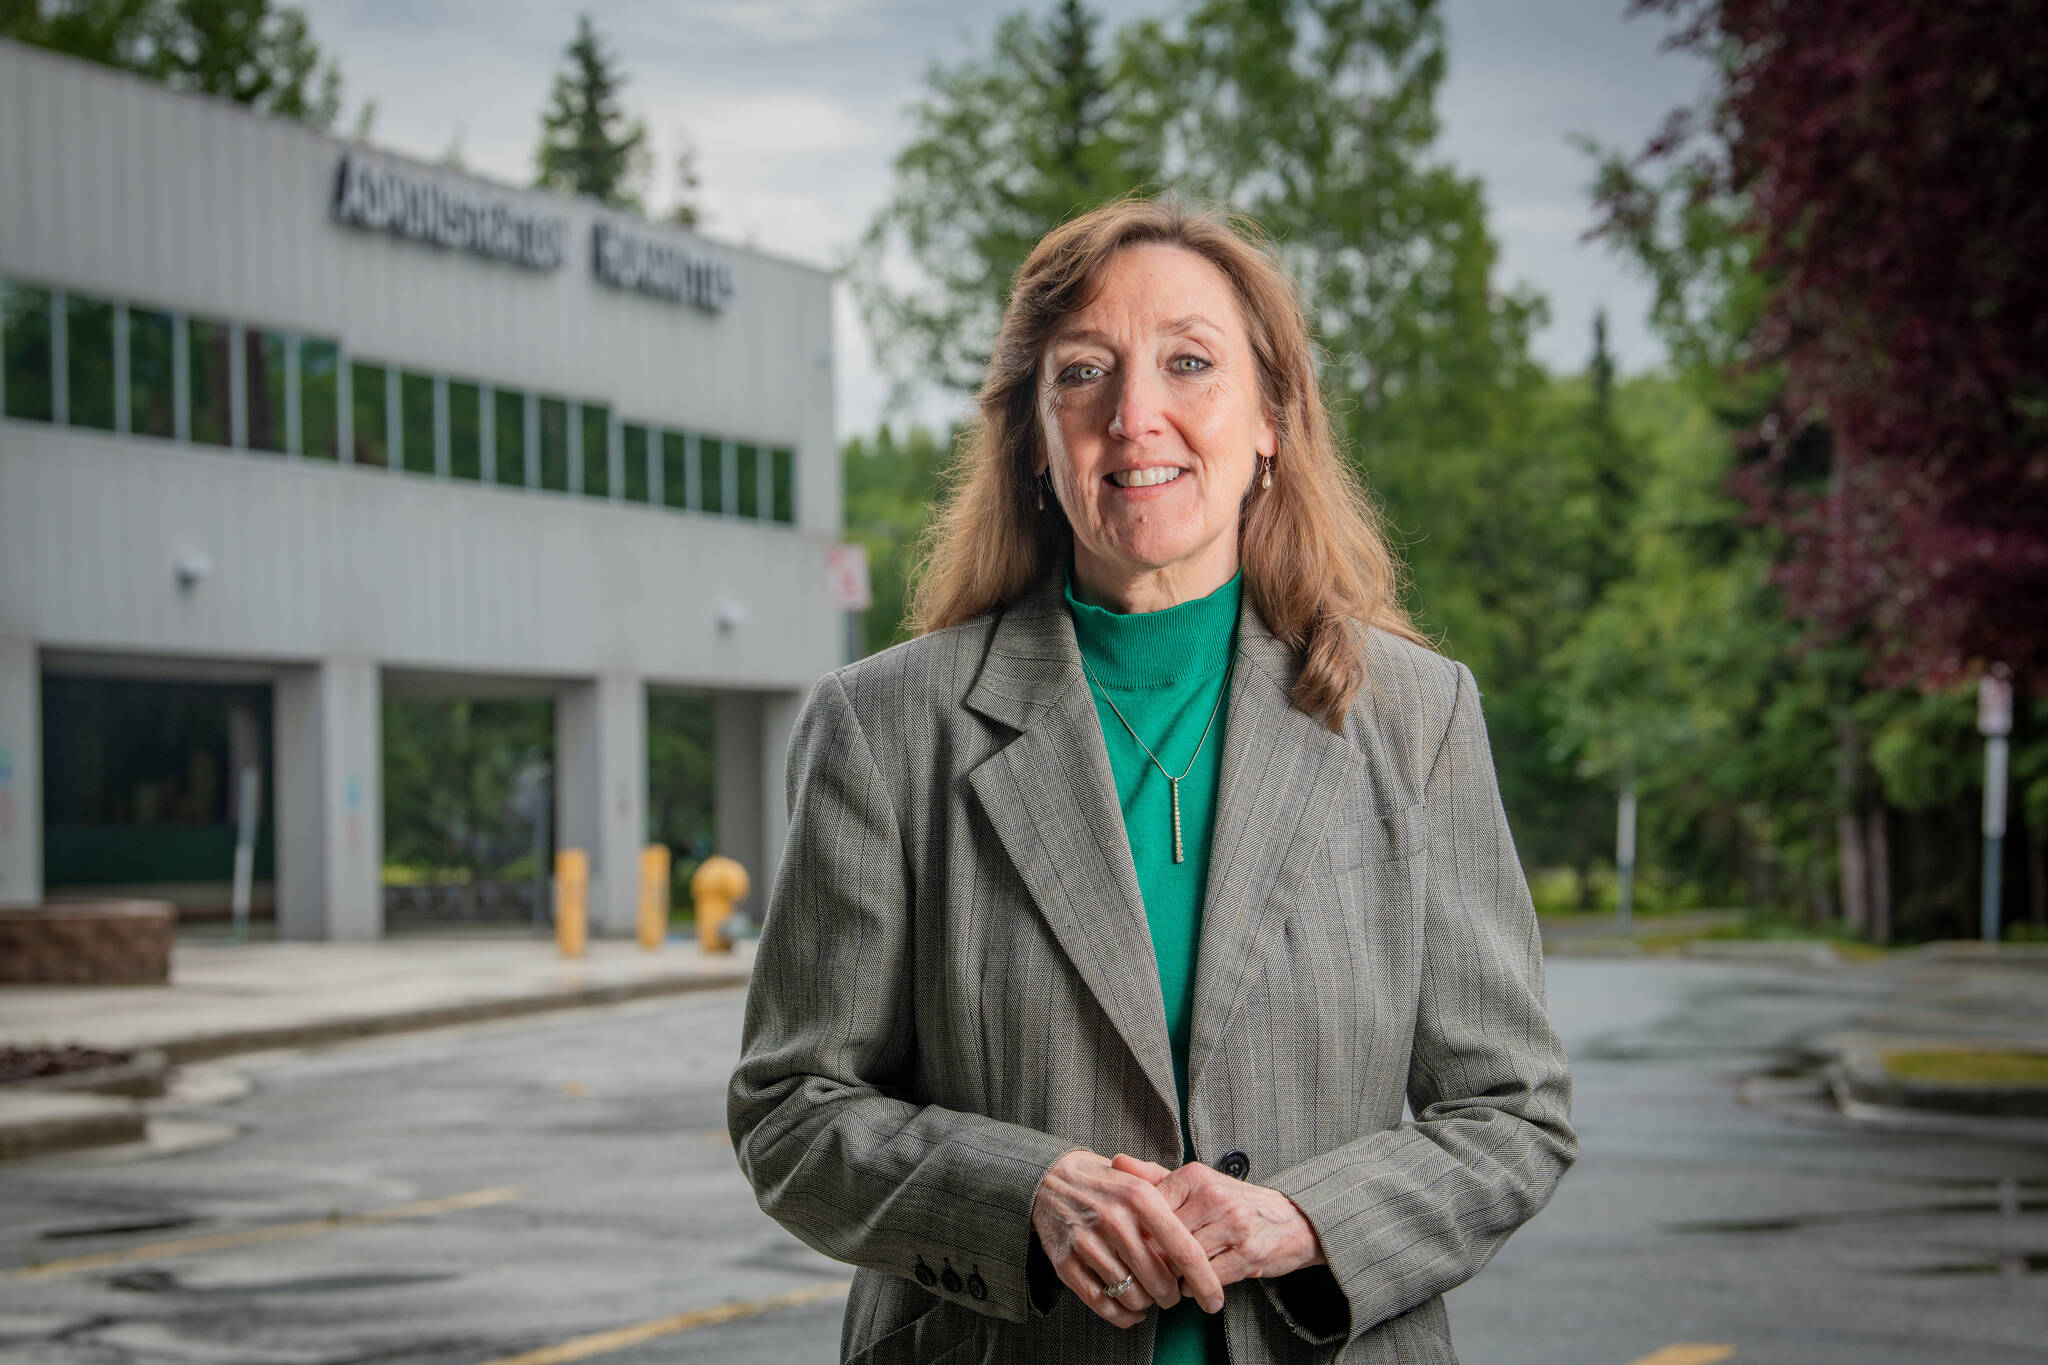 UAA Provost Denise Runge photographed outside the Administration and Humanities Building.